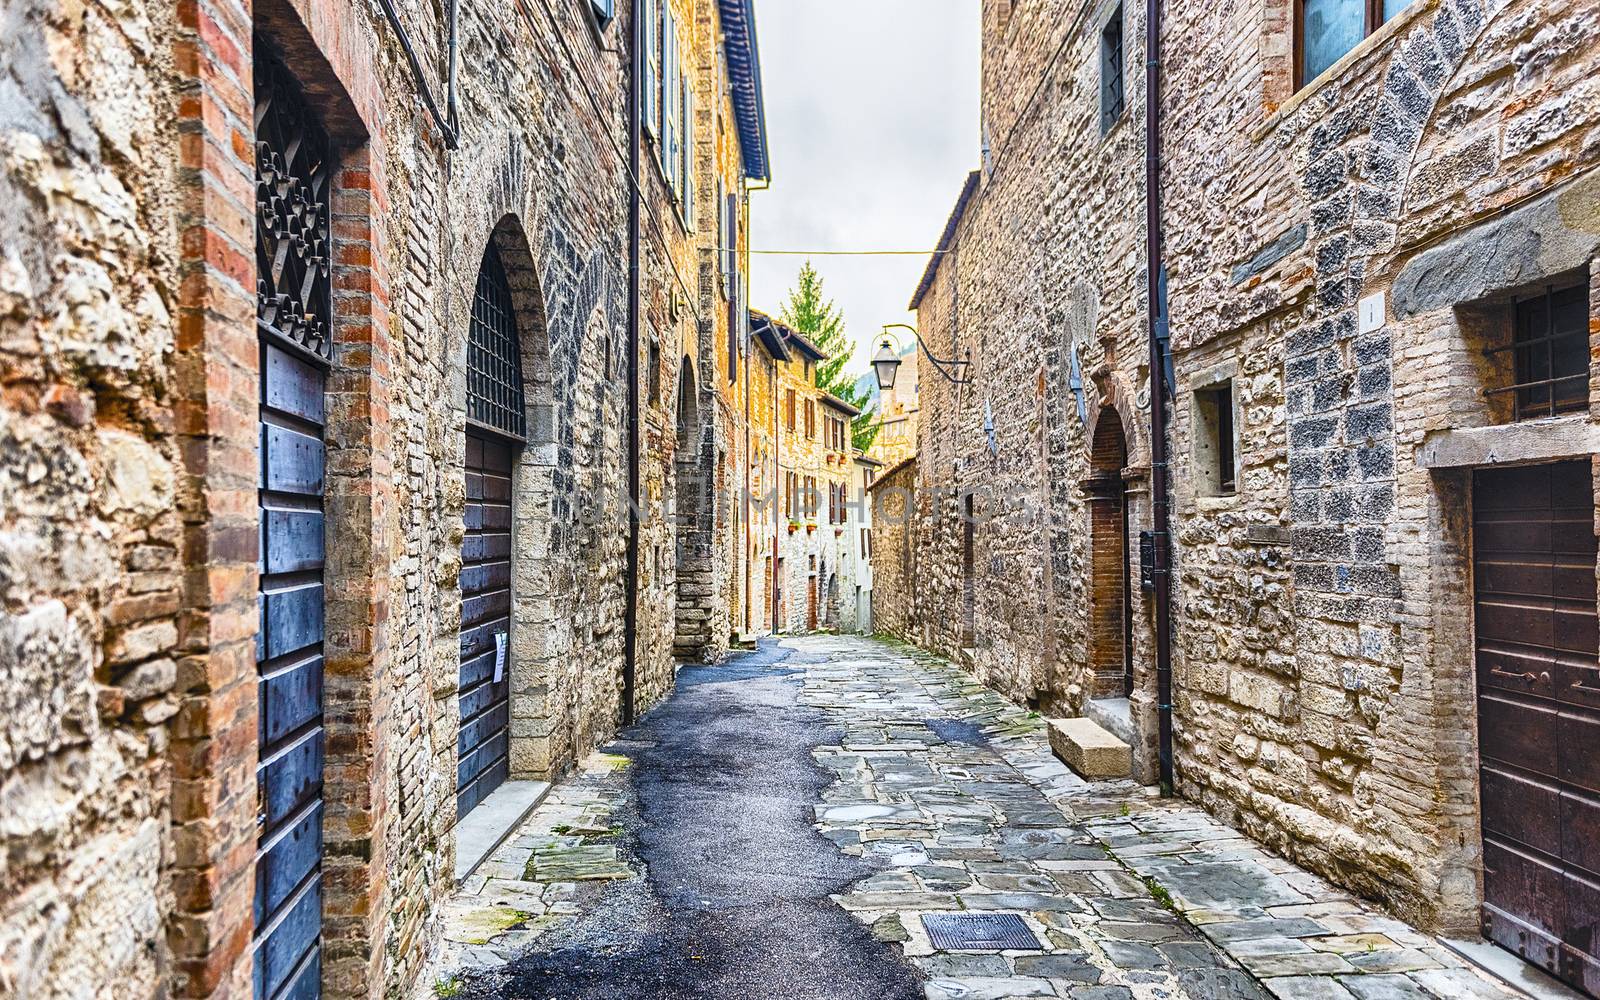 Scenic streets of the medieval town of Gubbio, Umbria, Italy by marcorubino